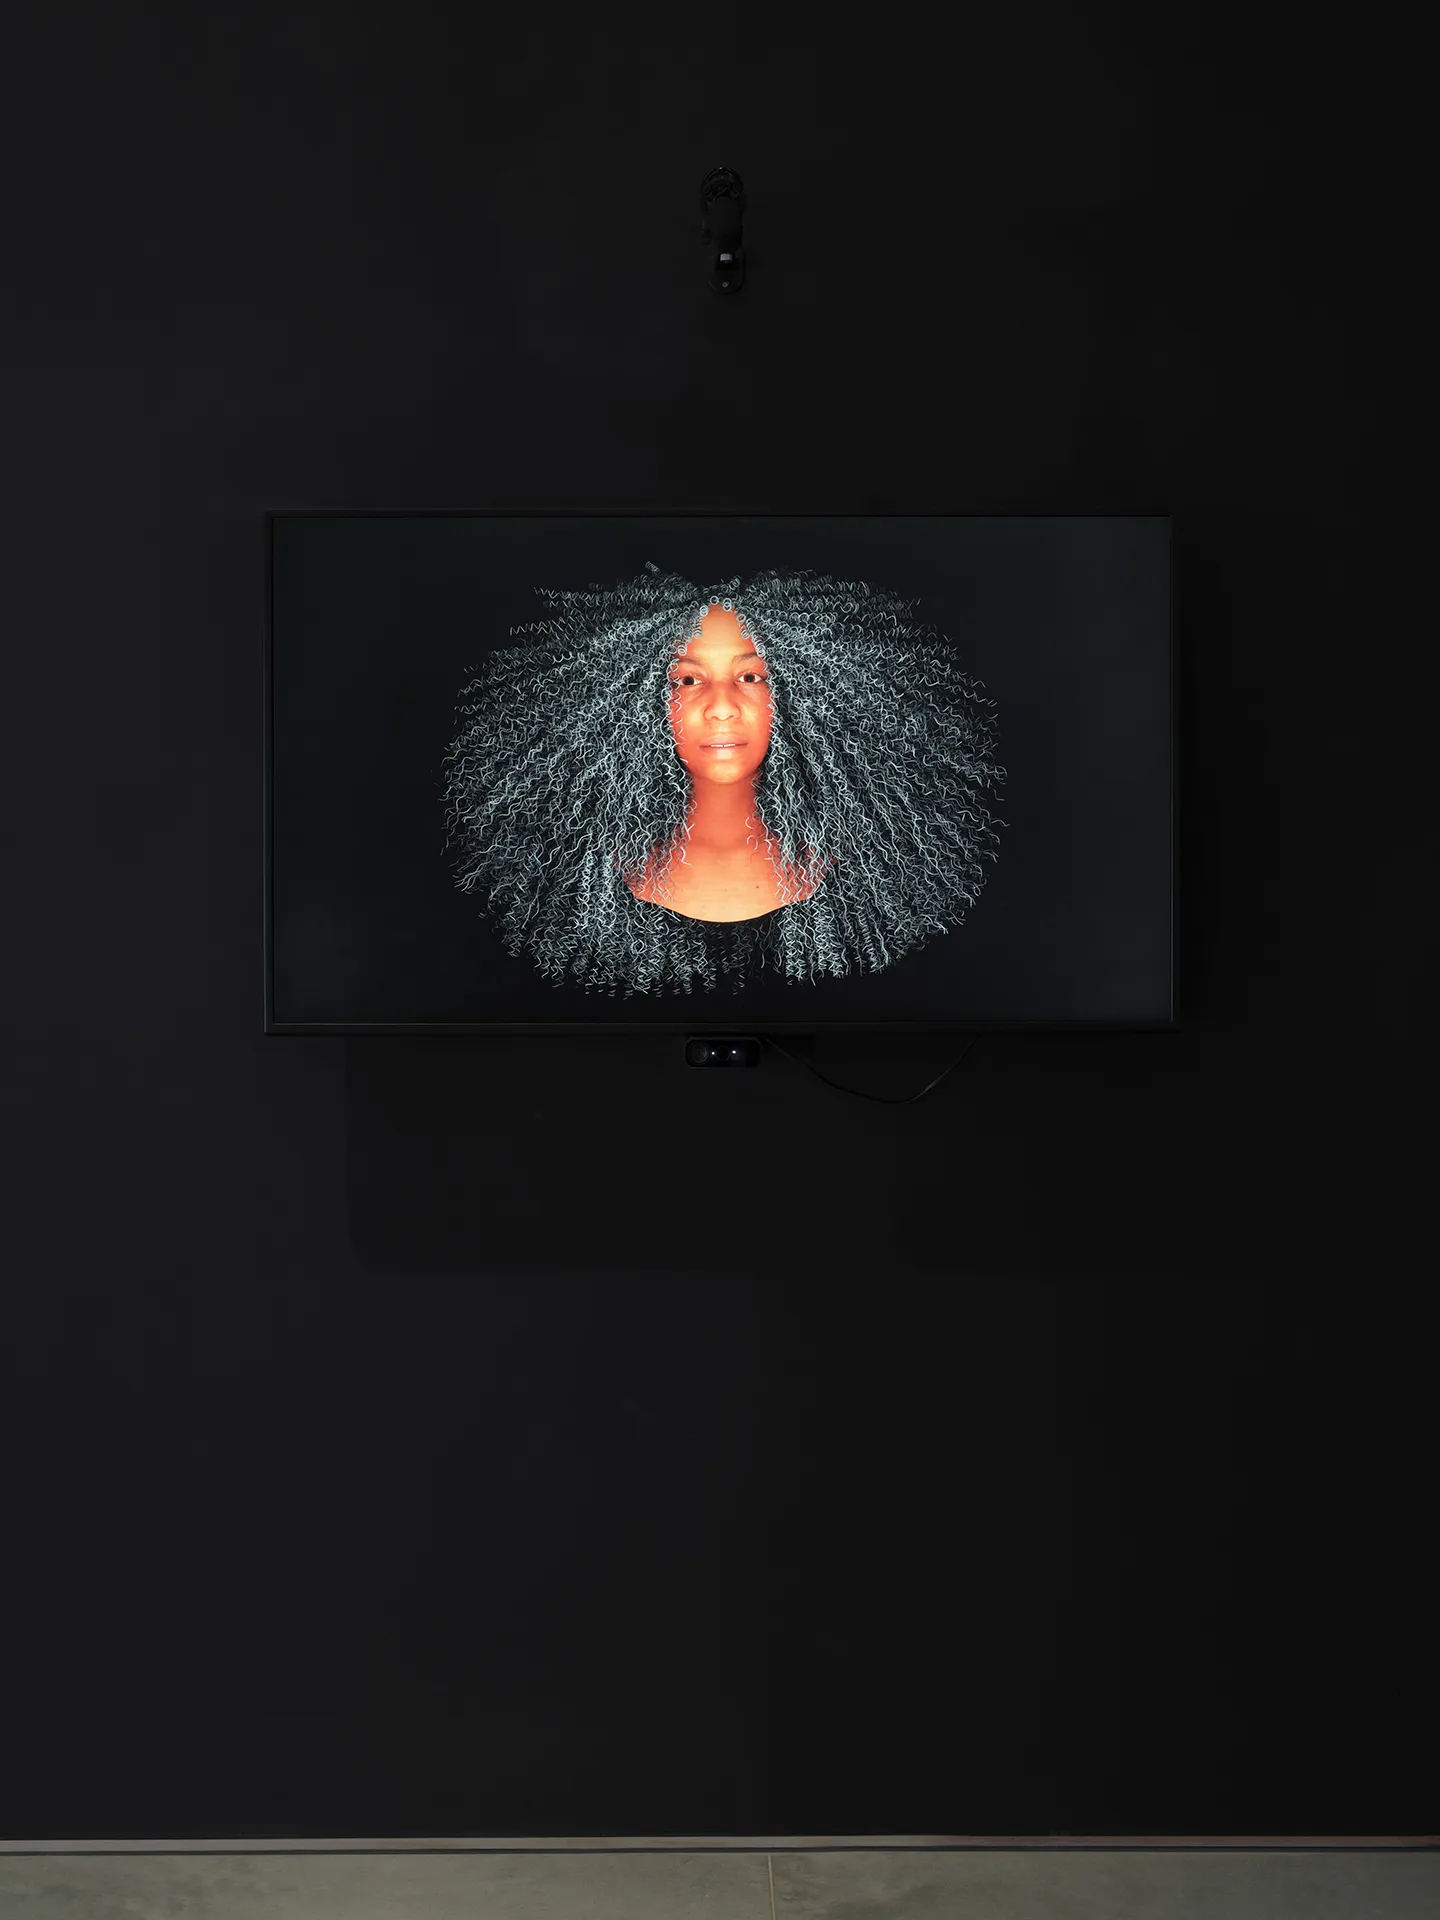 Image of a Black woman’s head on a black background. The woman has saturated orange skin and long white curly hair.